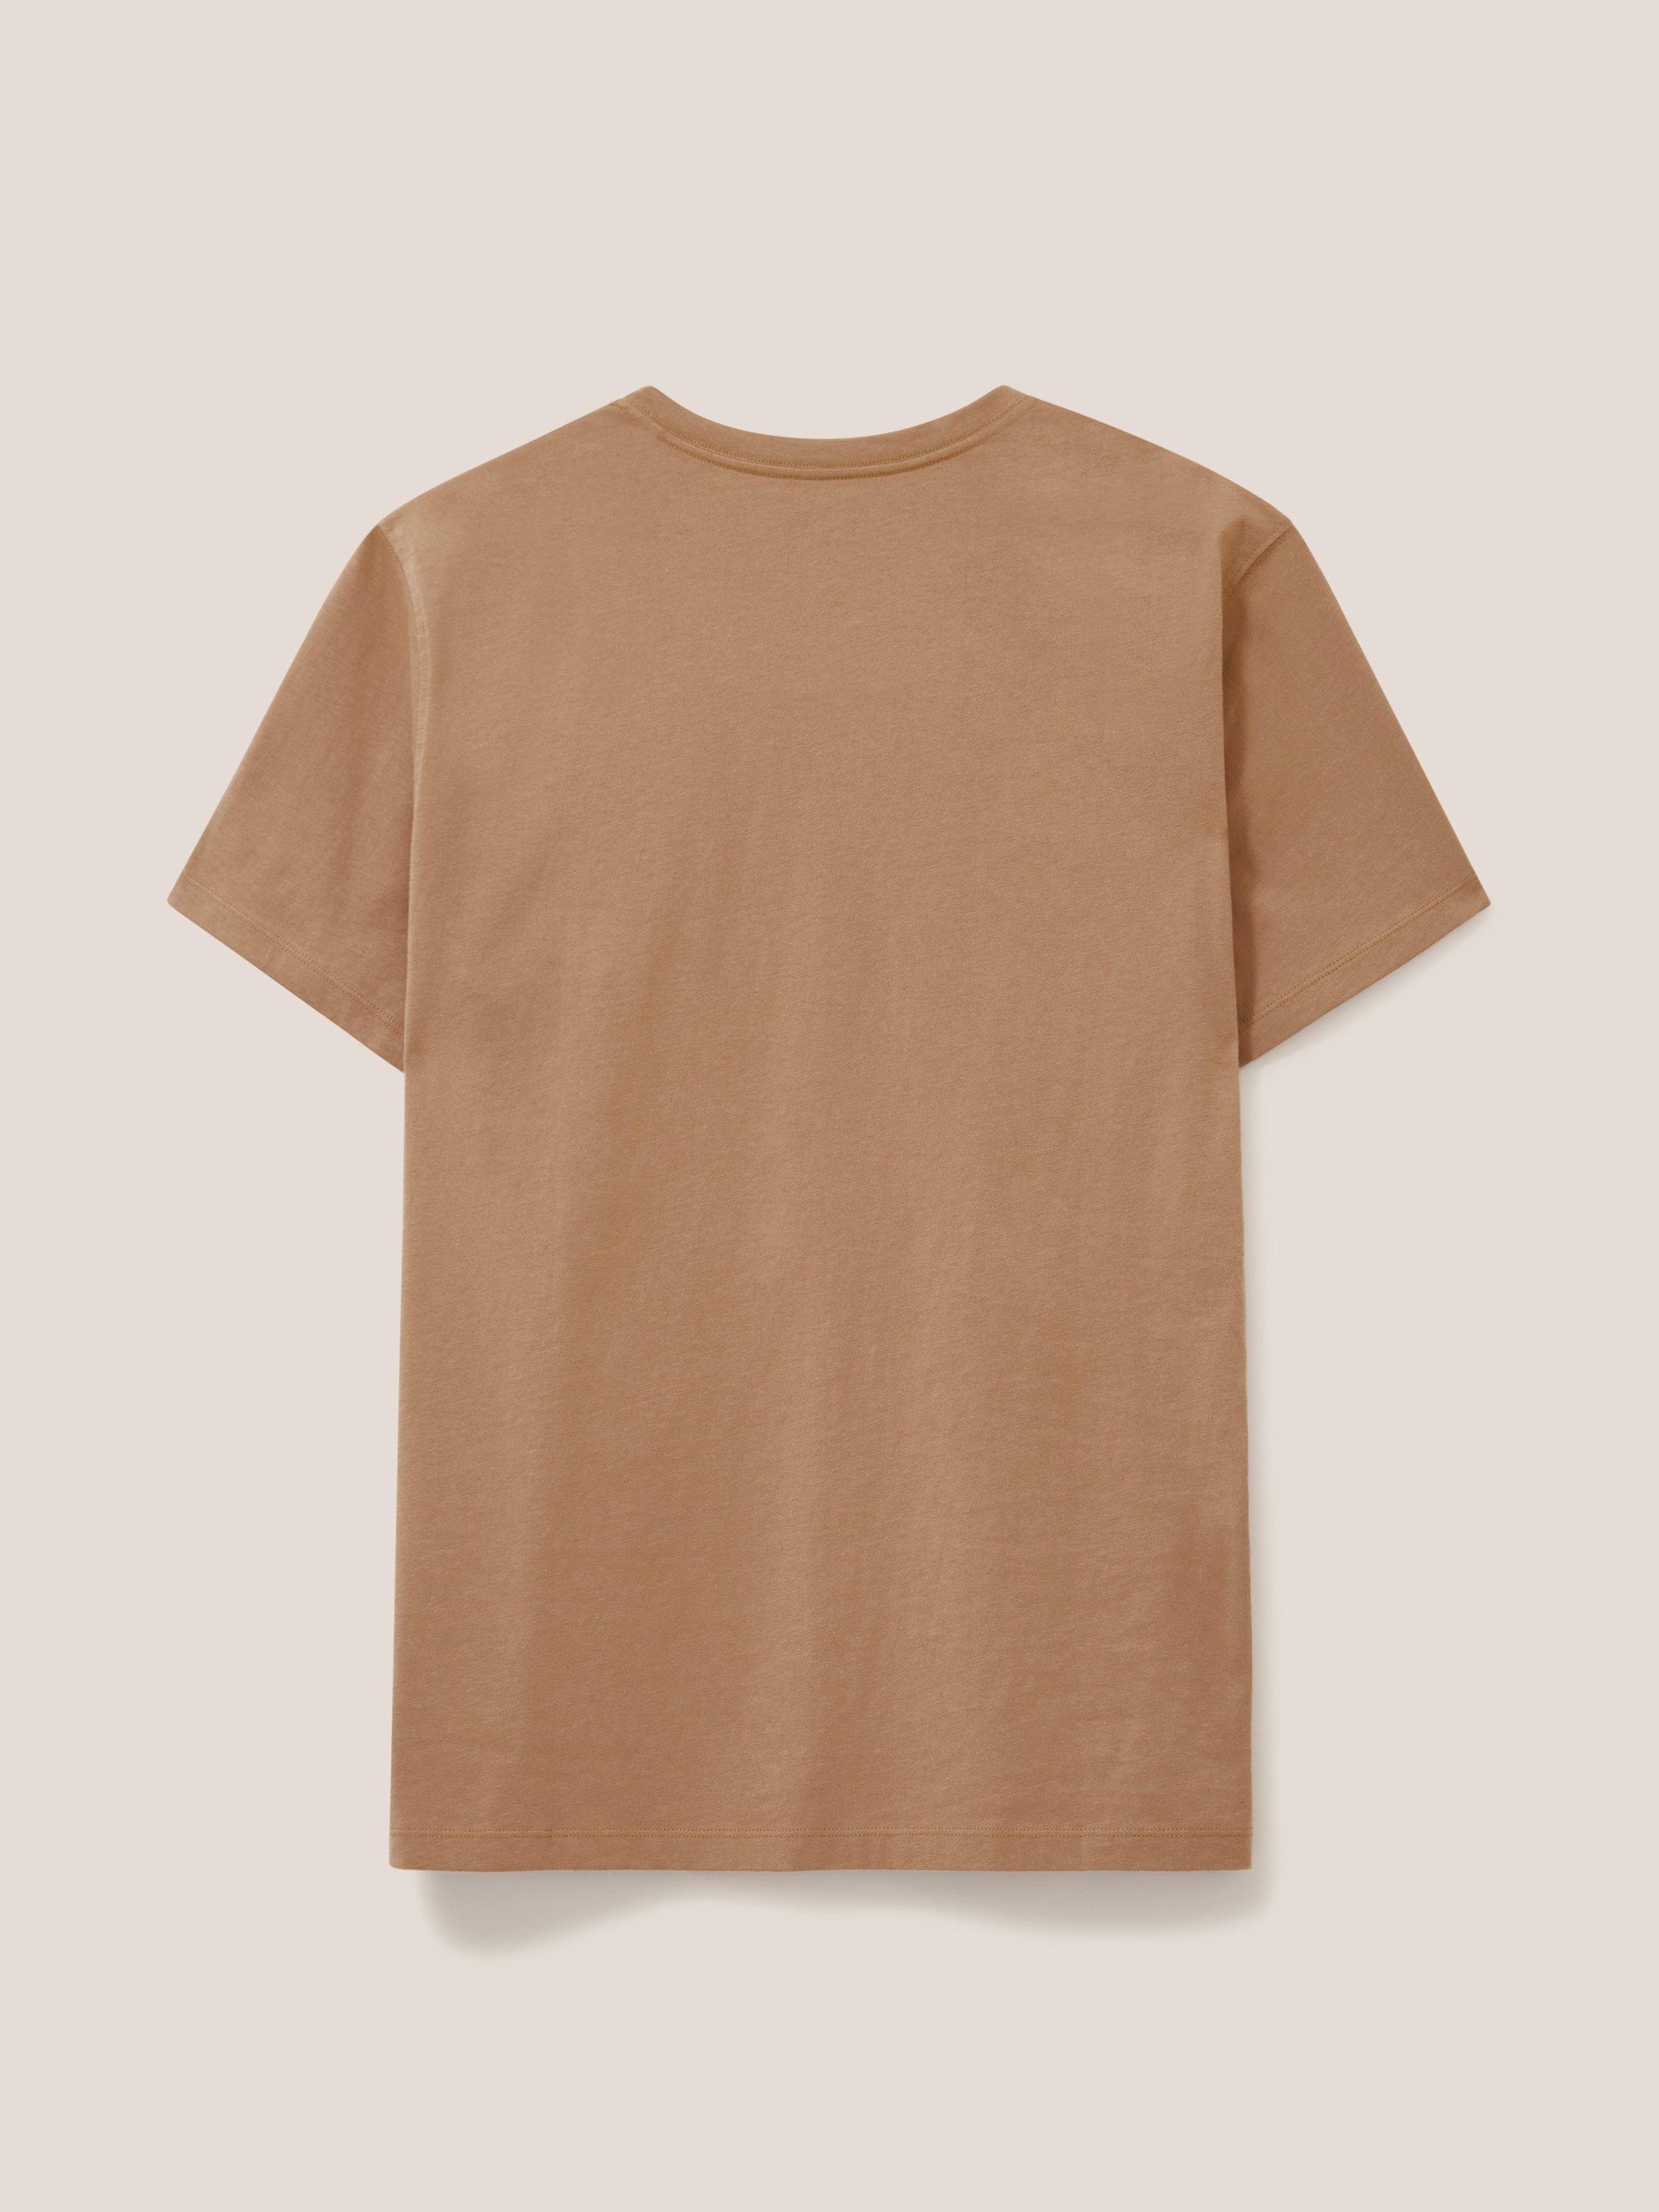 Abstract Art Graphic Tee in MID BROWN - FLAT BACK